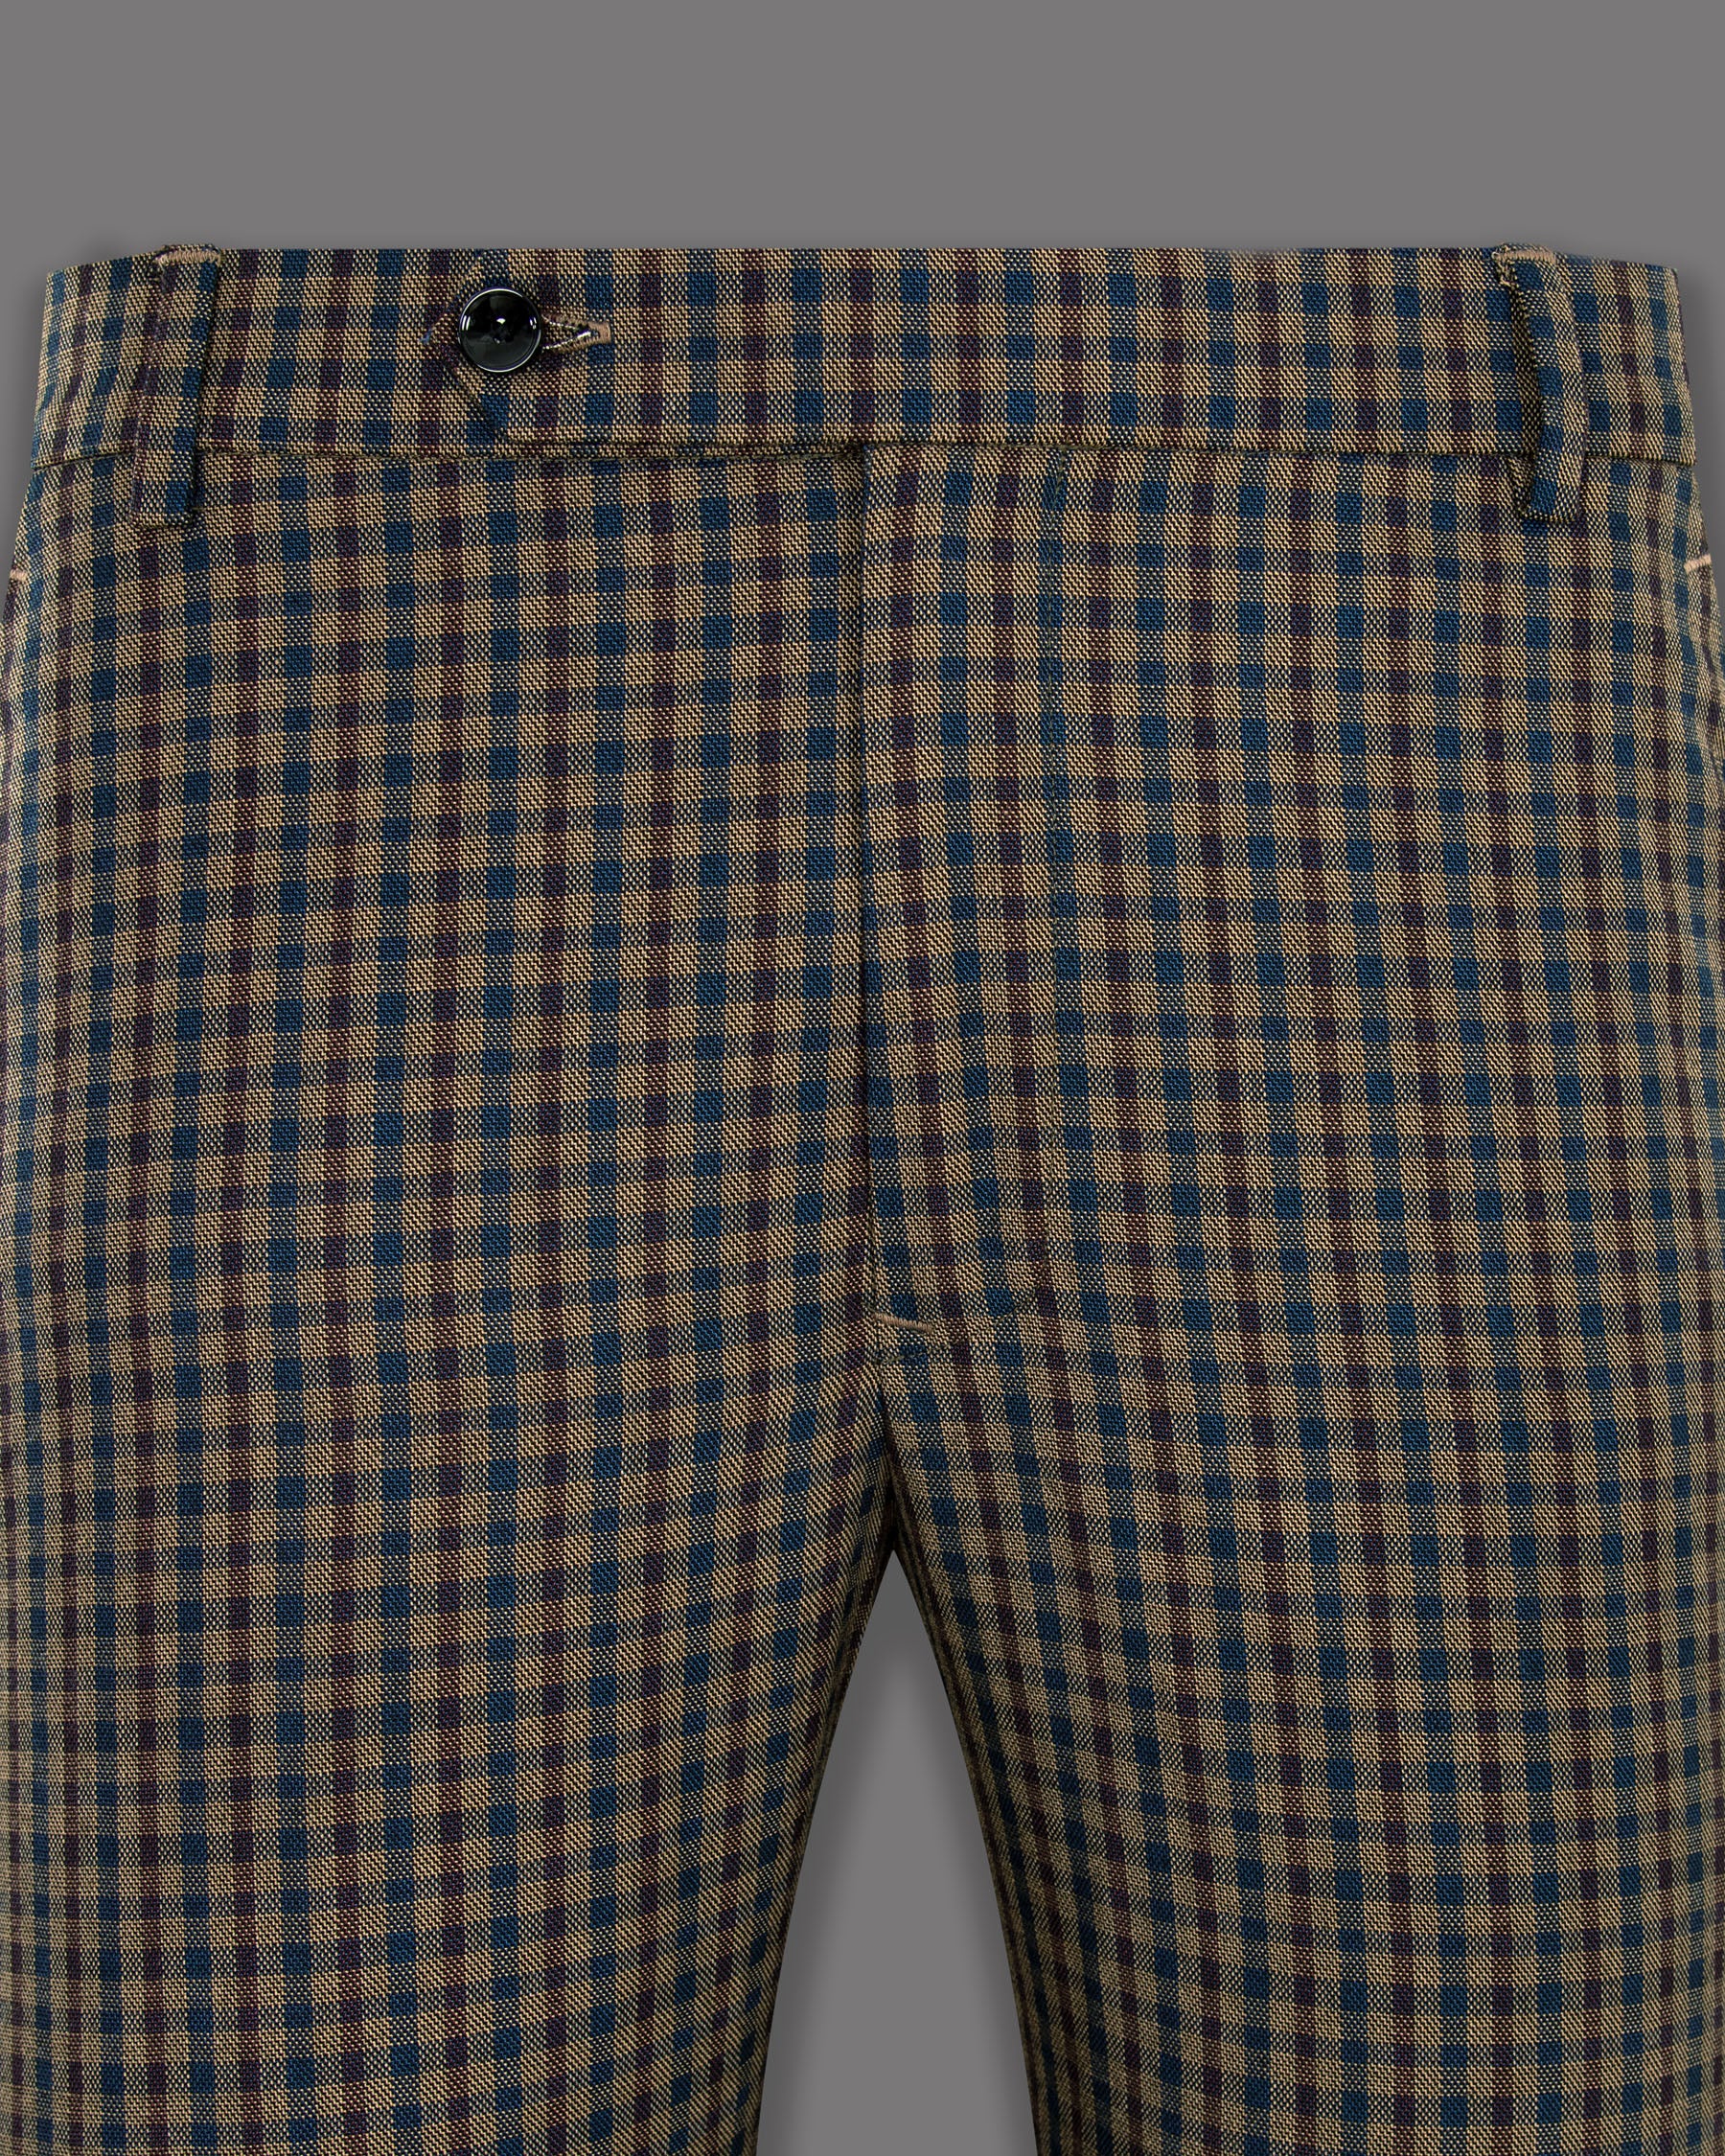 Givry and Blumine Gingham Woolrich Pant T1277-28, T1277-30, T1277-32, T1277-42, T1277-44, T1277-34, T1277-36, T1277-38, T1277-40